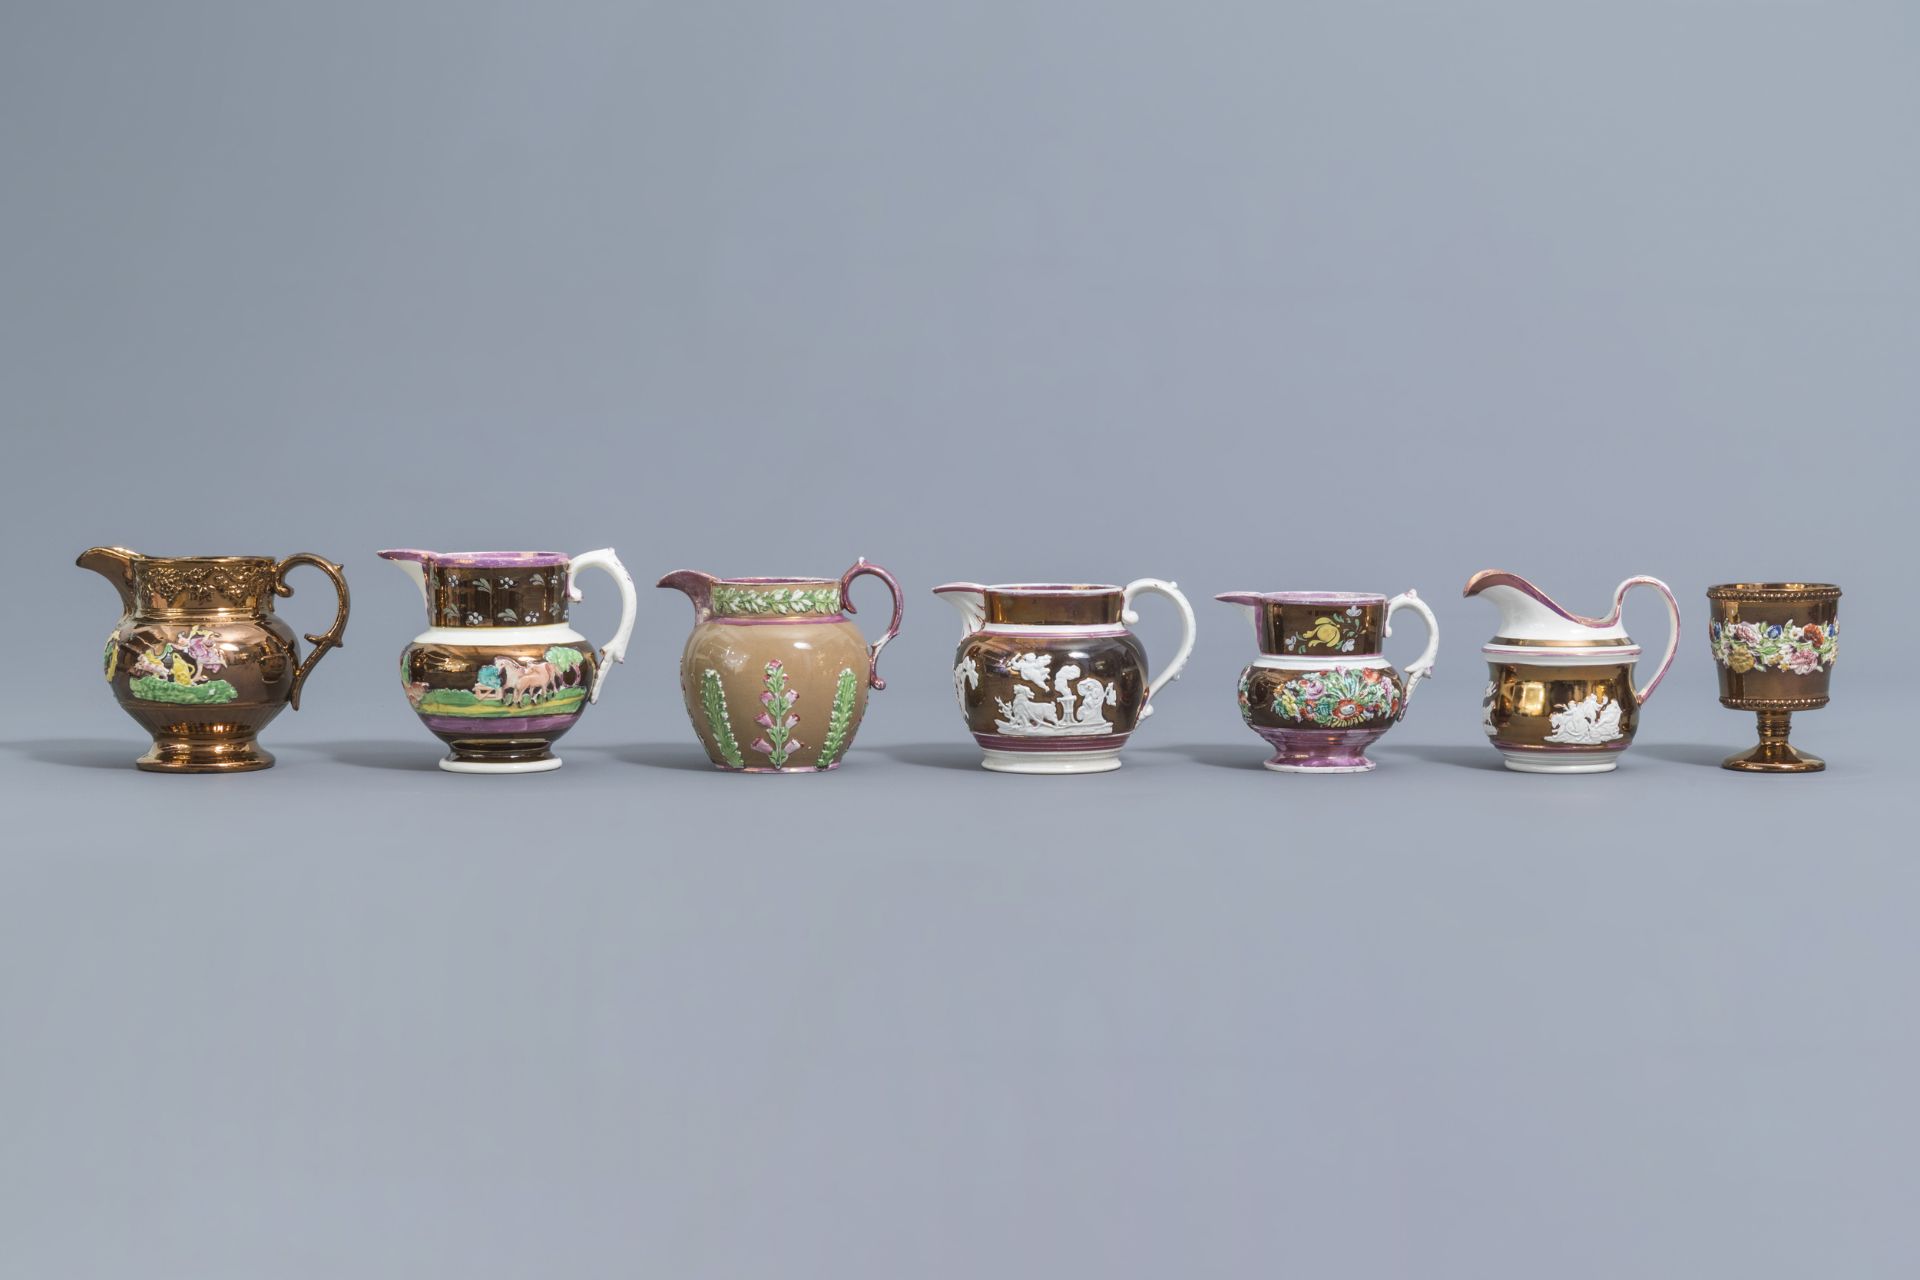 A varied collection of English lustreware items with relief design, 19th C. - Image 32 of 50